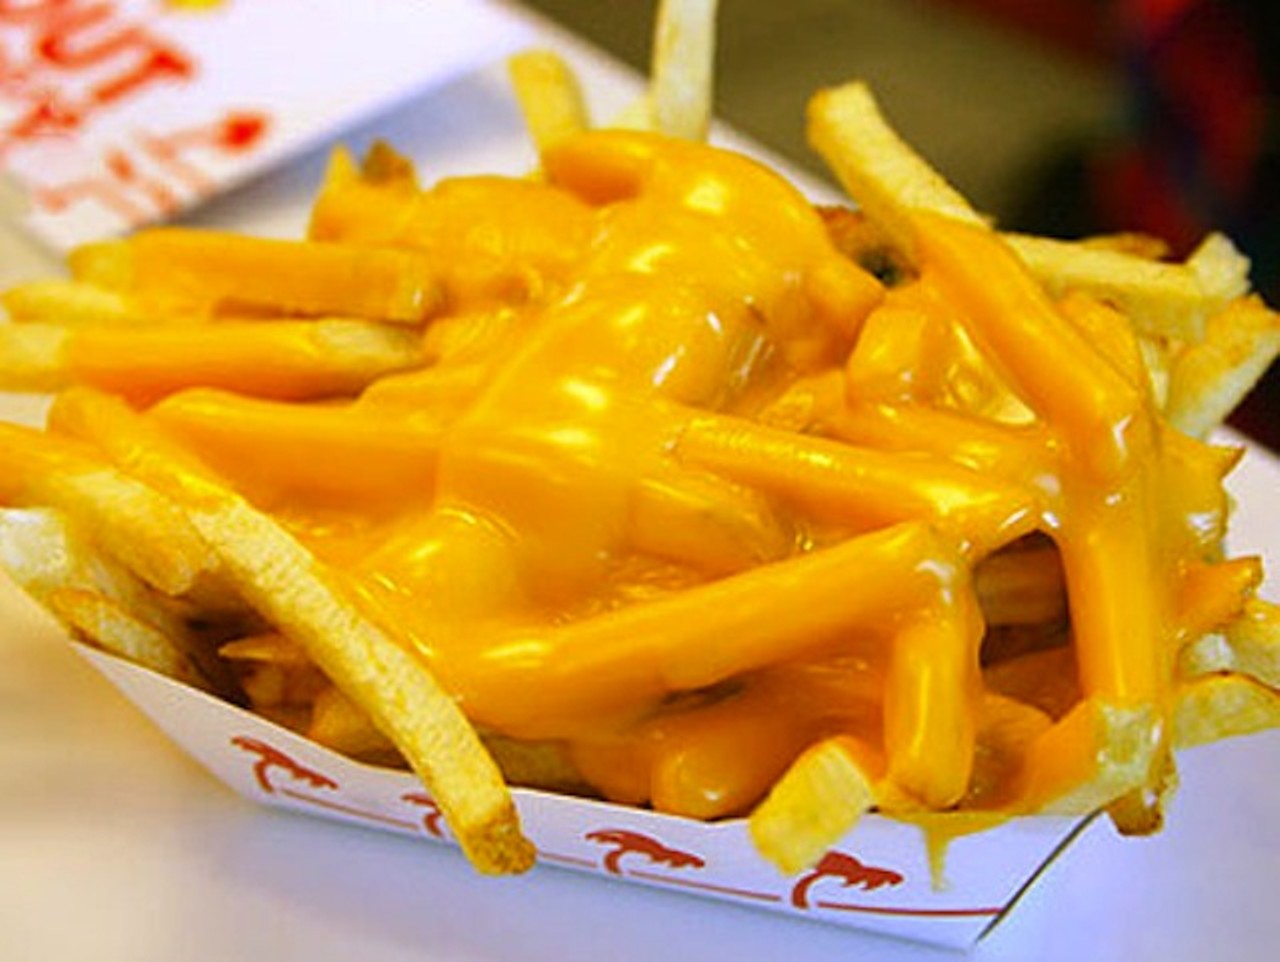 Cheese Fries 
This is exactly what it sounds like, melted cheese poured over your fry order.